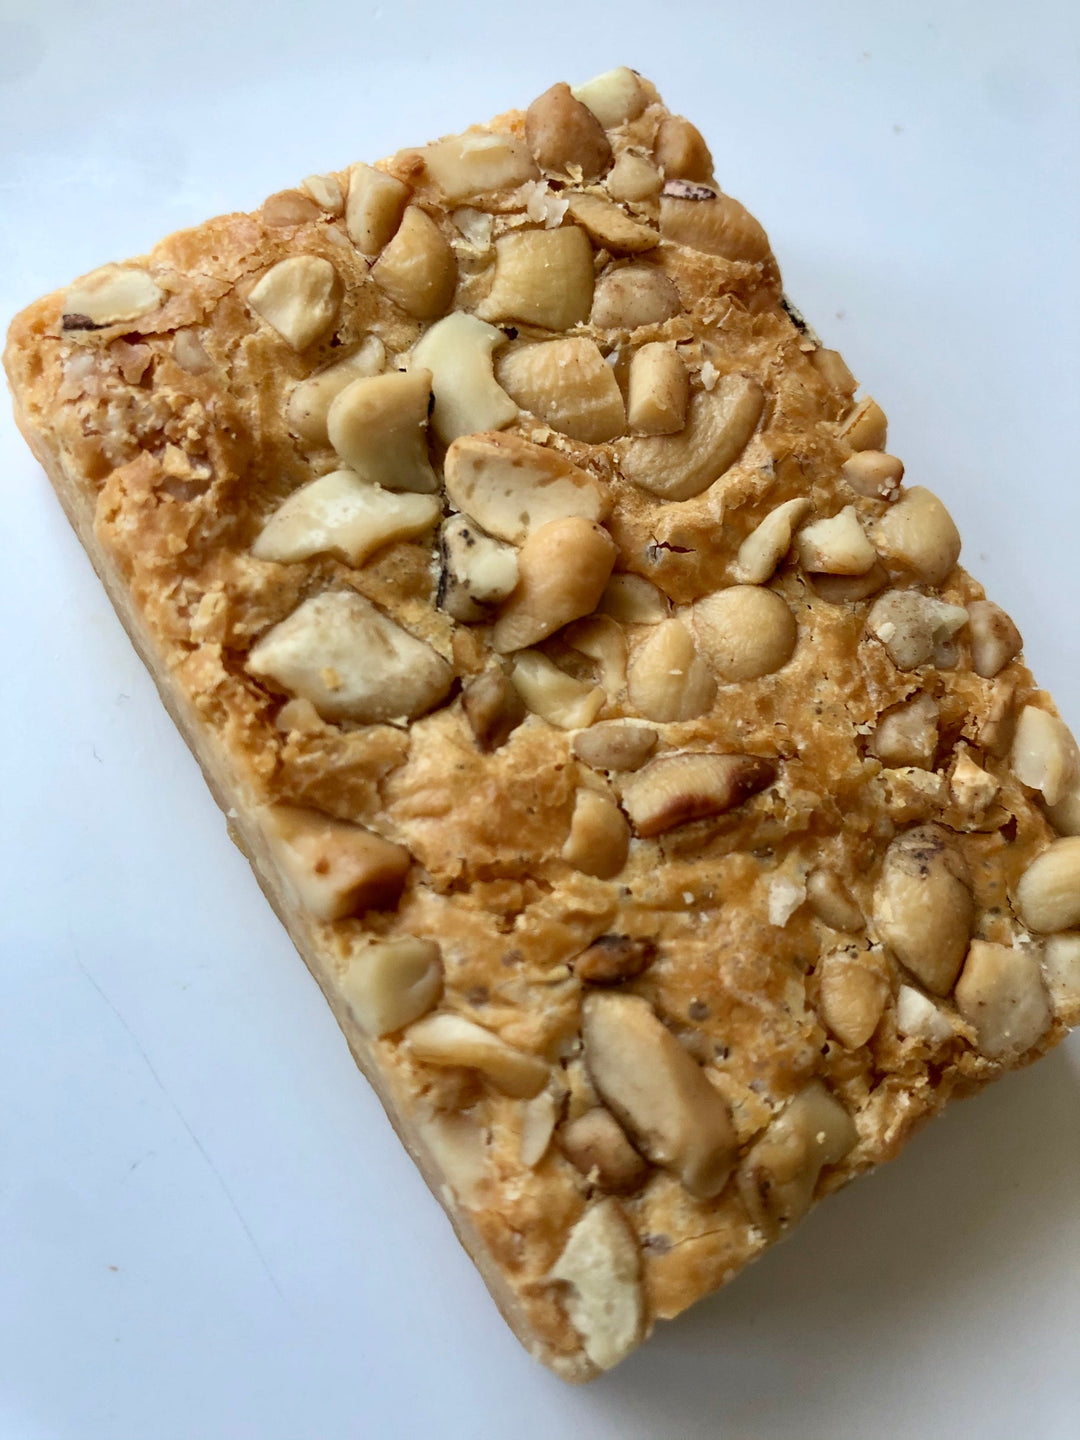 Red Ribbon BakeShop - Caramel Bar with Cashew Nuts 2 oz